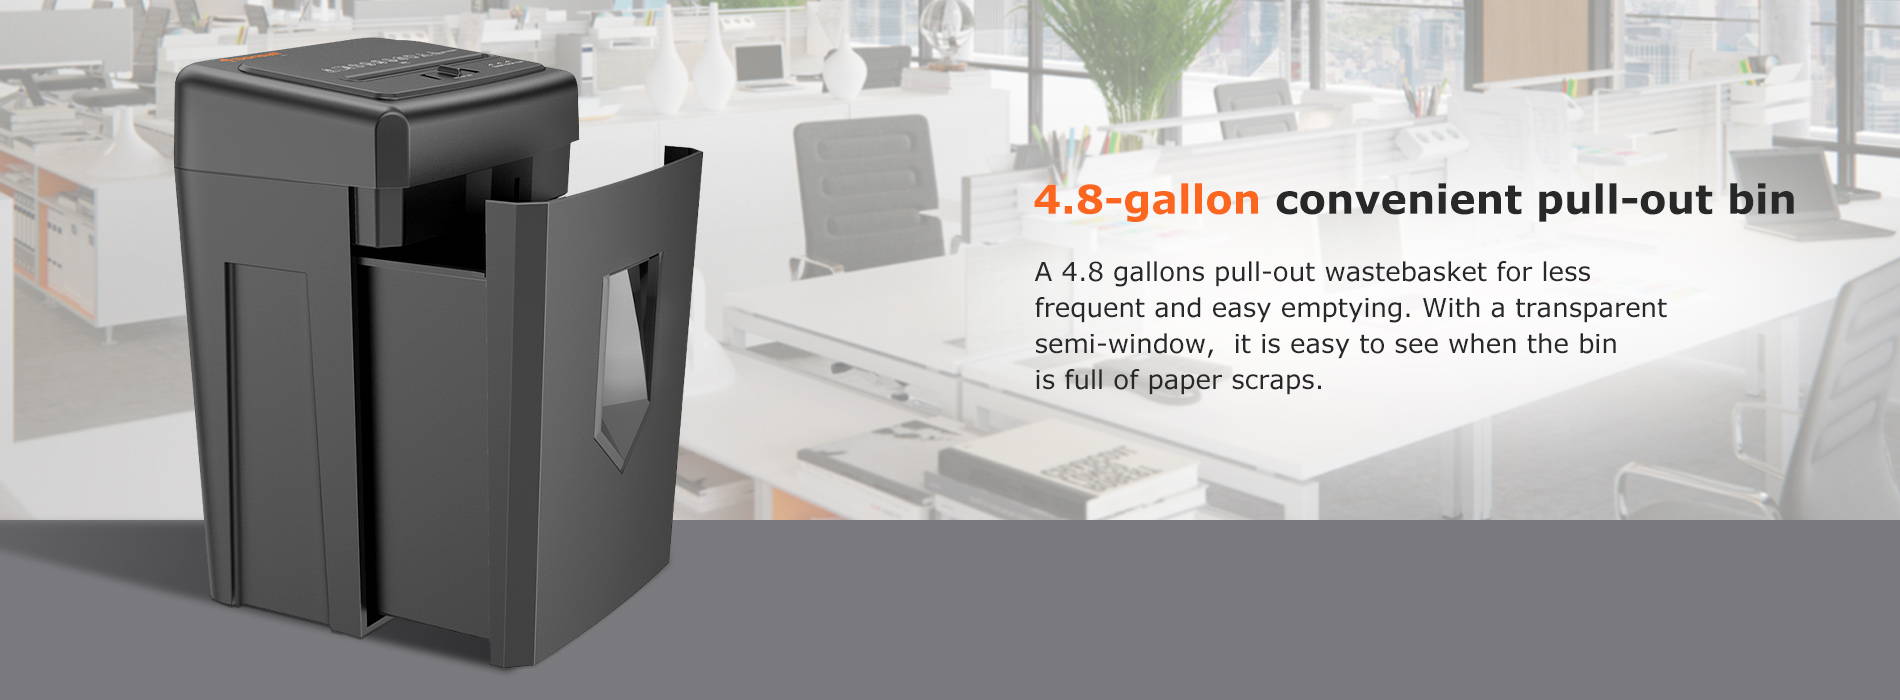 4.8-gallon convenient pull-out bin  A 4.8 gallons pull-out wastebasket for less frequent and easy emptying. With a transparent semi-window, it is easy to see when the binis full of paper scraps.